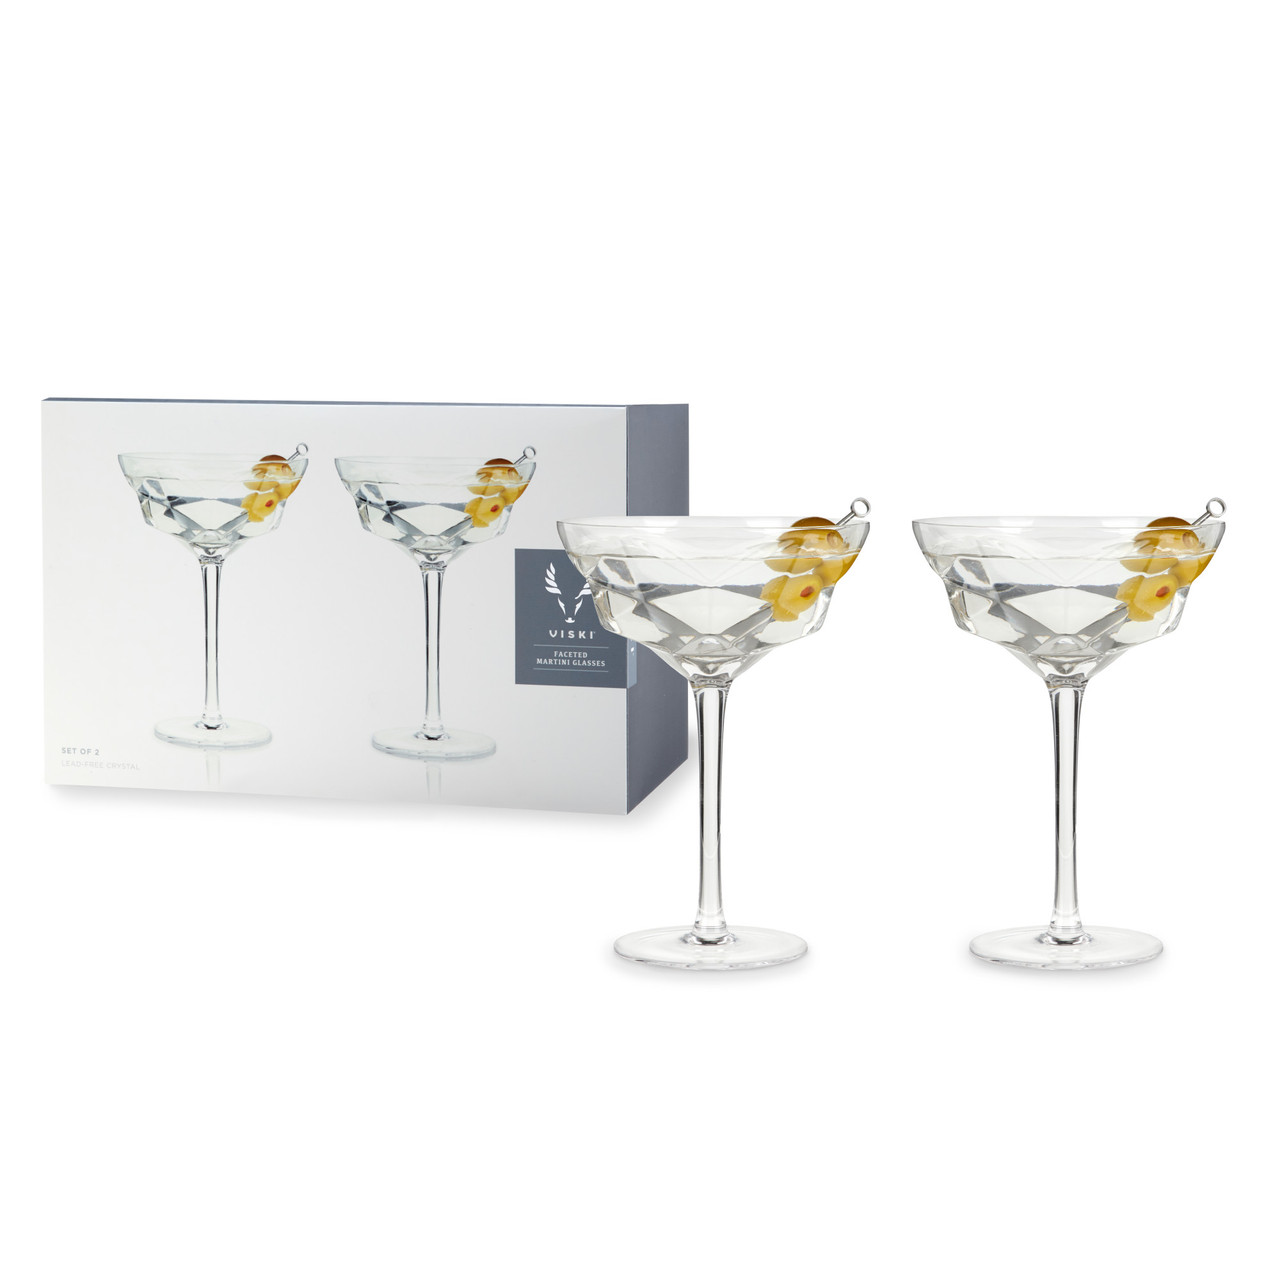 https://cdn11.bigcommerce.com/s-oo0gdojvjo/images/stencil/1280x1280/products/68695/100837/faceted-martini-glasses-by-viski-set-of-2__75584.1683777540.jpg?c=2&imbypass=on